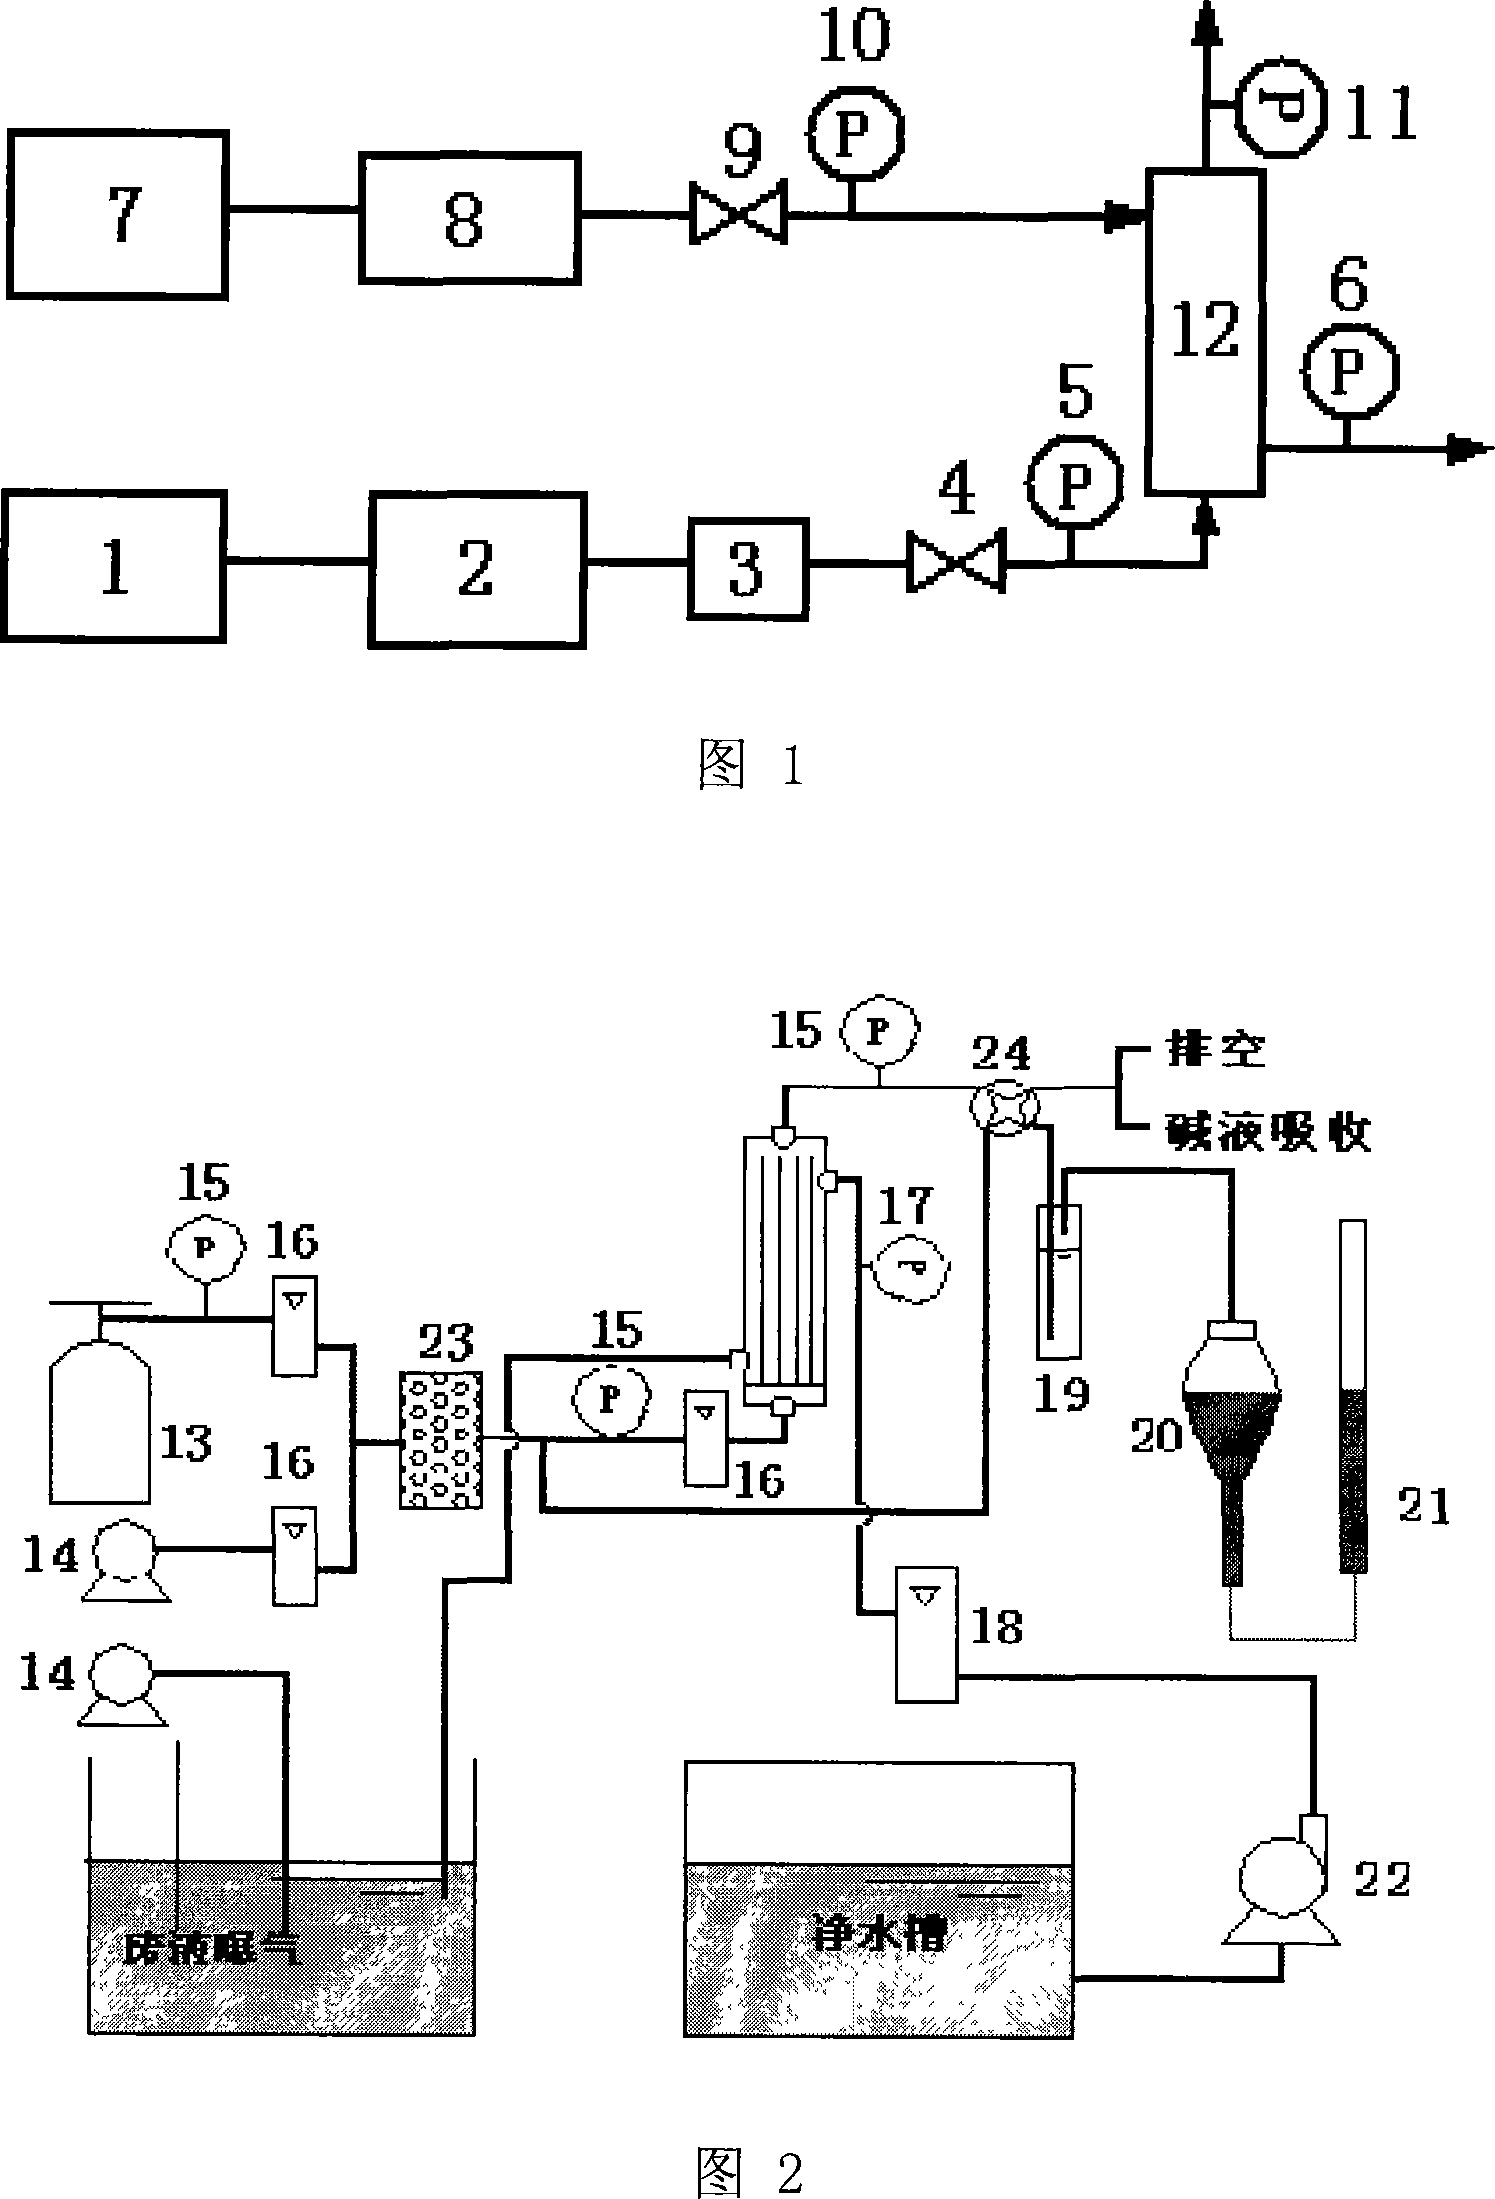 Technical method by using seawater to remove sulfur dioxide in smoke through membrane absorption method